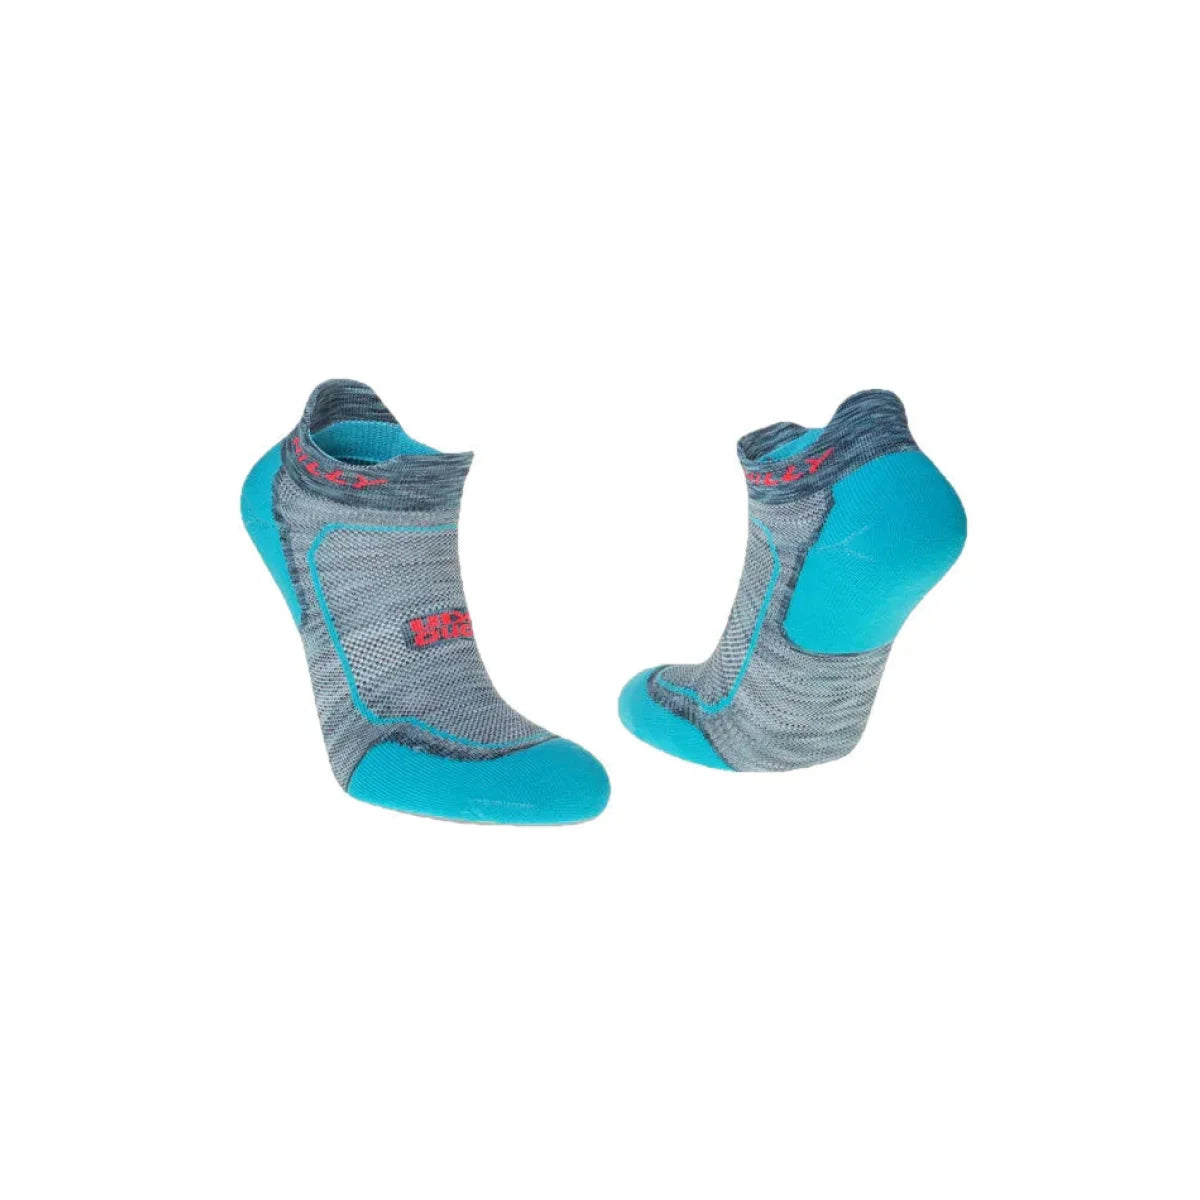 Women's Hilly Active Socklets